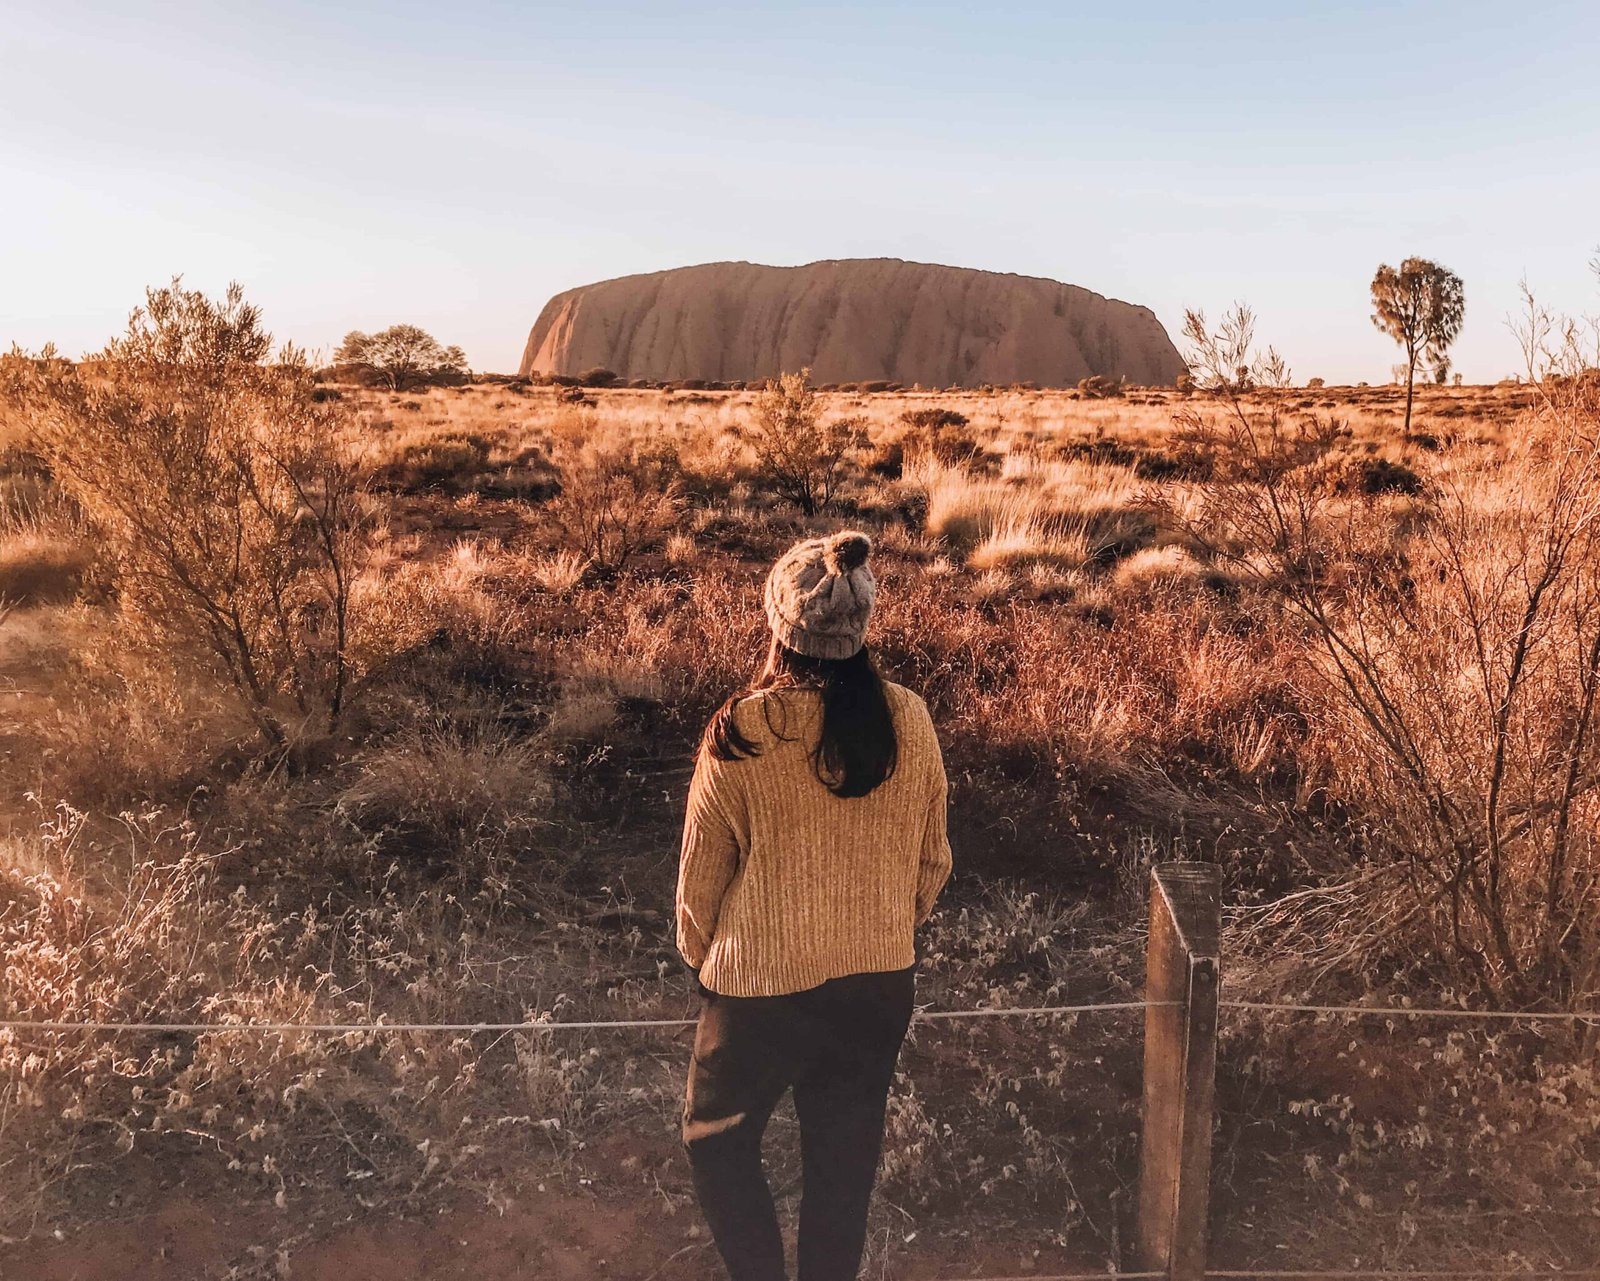 Photo from a collaboration I did with The Rock Tours and Greyhound Australia to Uluru and Outback Australia in 2019